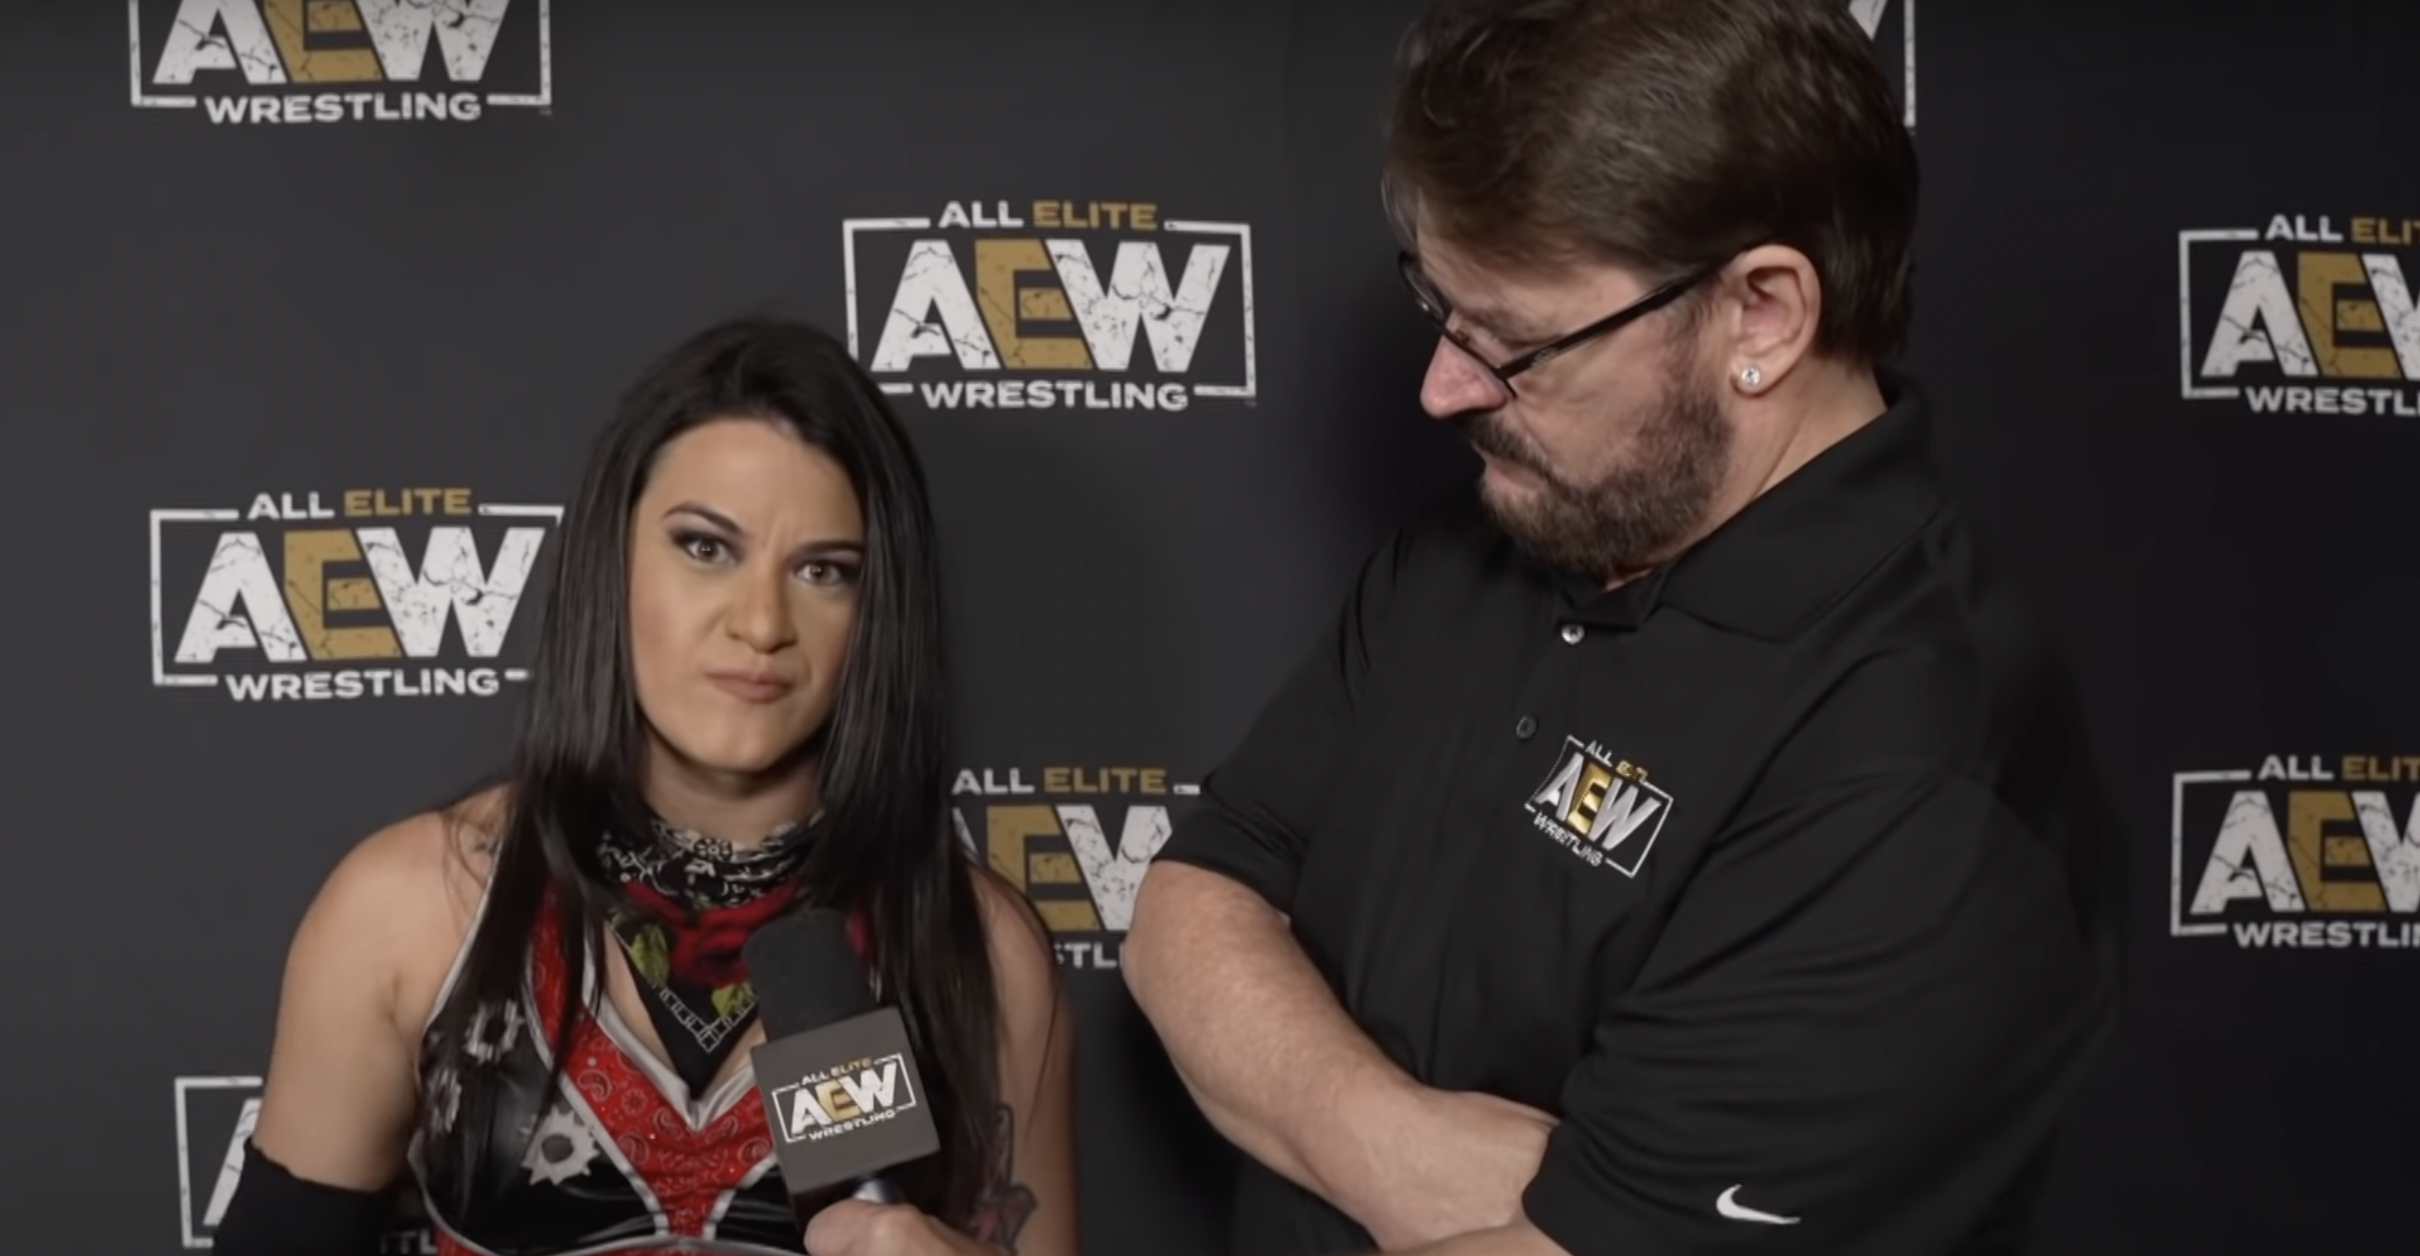 AEW Dynamite 2022 on TBS live stream, time, TV channel, how to watch Season 4, Episode 7 online (2/16/22)